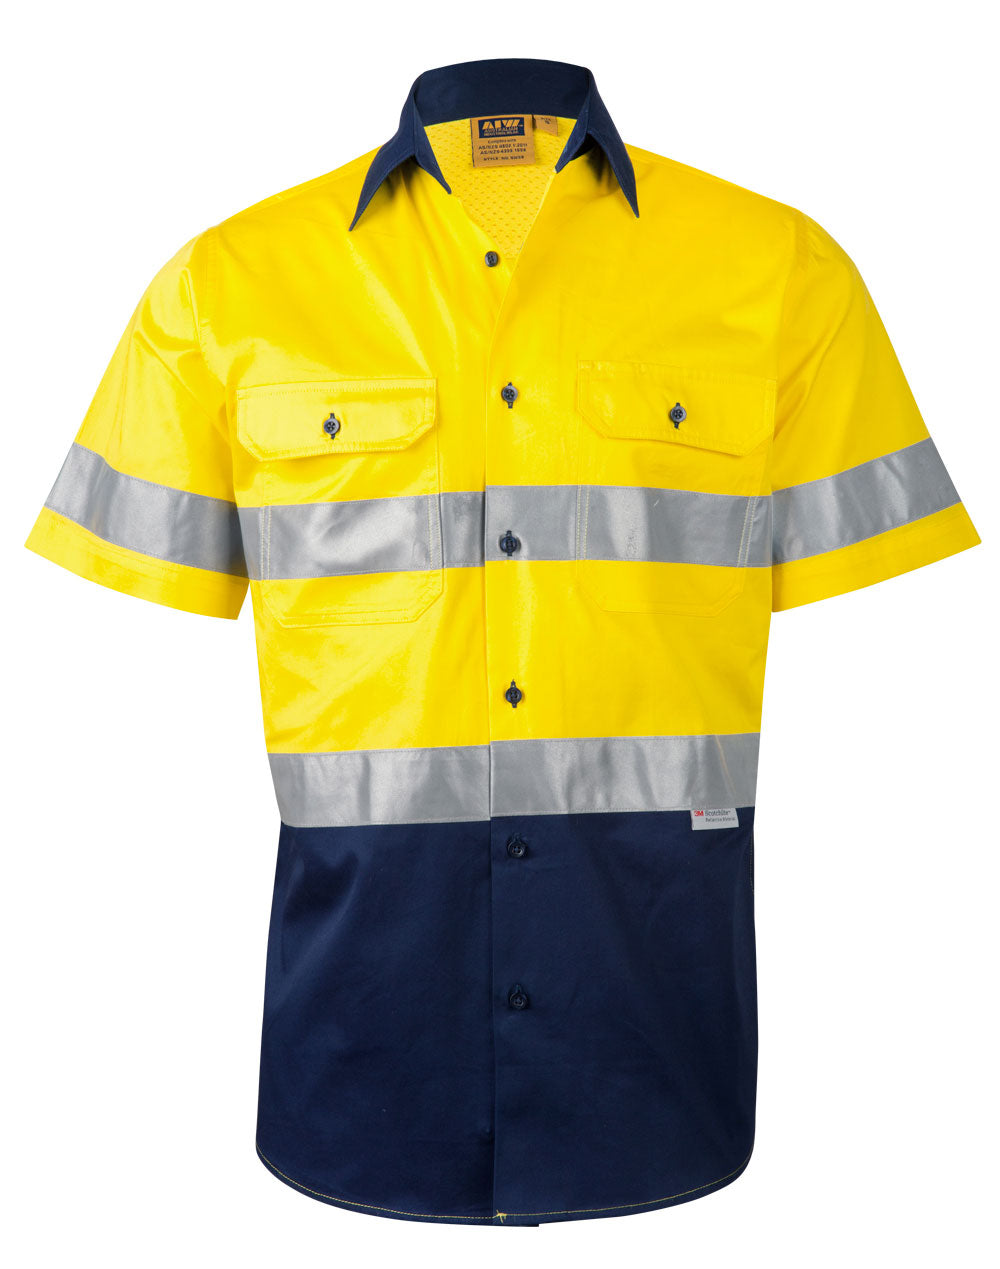 Winning Spirit Men's High Visibility Cool-Breeze Cotton Twill Safety Shirts With Reflective 3M Tapes-(SW59)